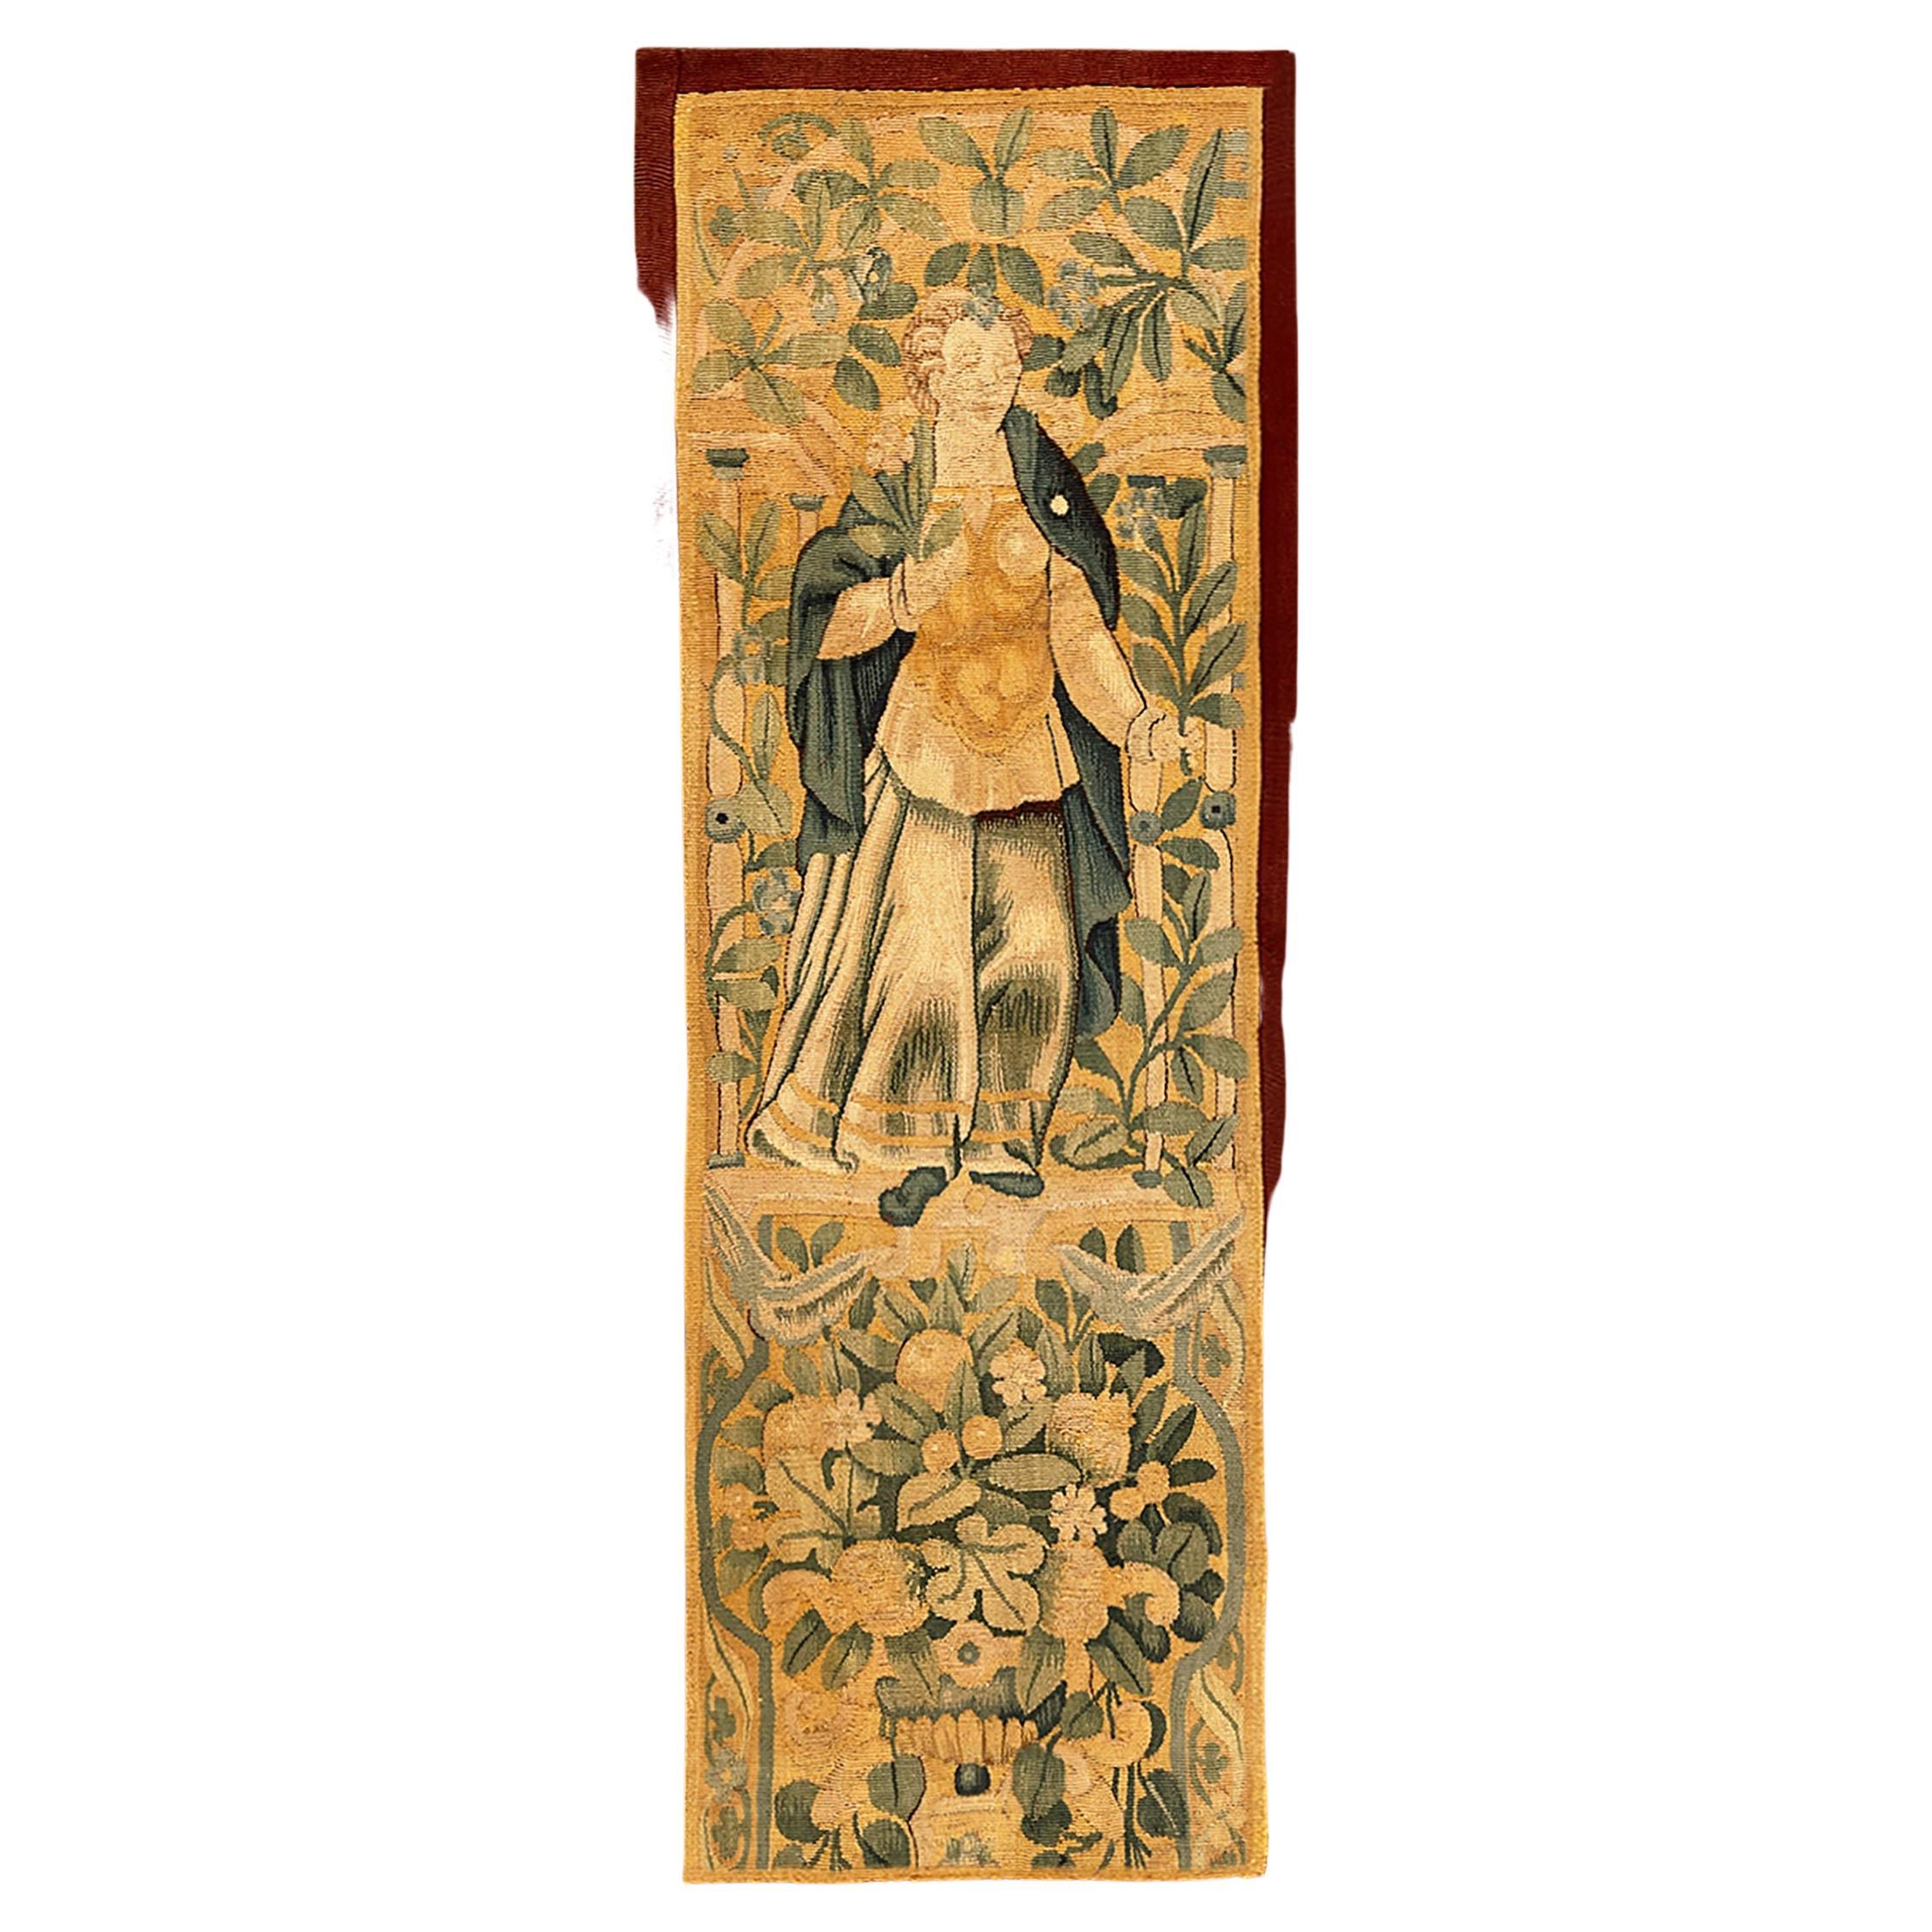 A 17th century Flemish Historical Tapestry panel. This vertically oriented decorative tapestry panel depicts a regal female figure at top, with a floral reserve below her. The central area is enclosed within a narrow monochrome border. Wool with